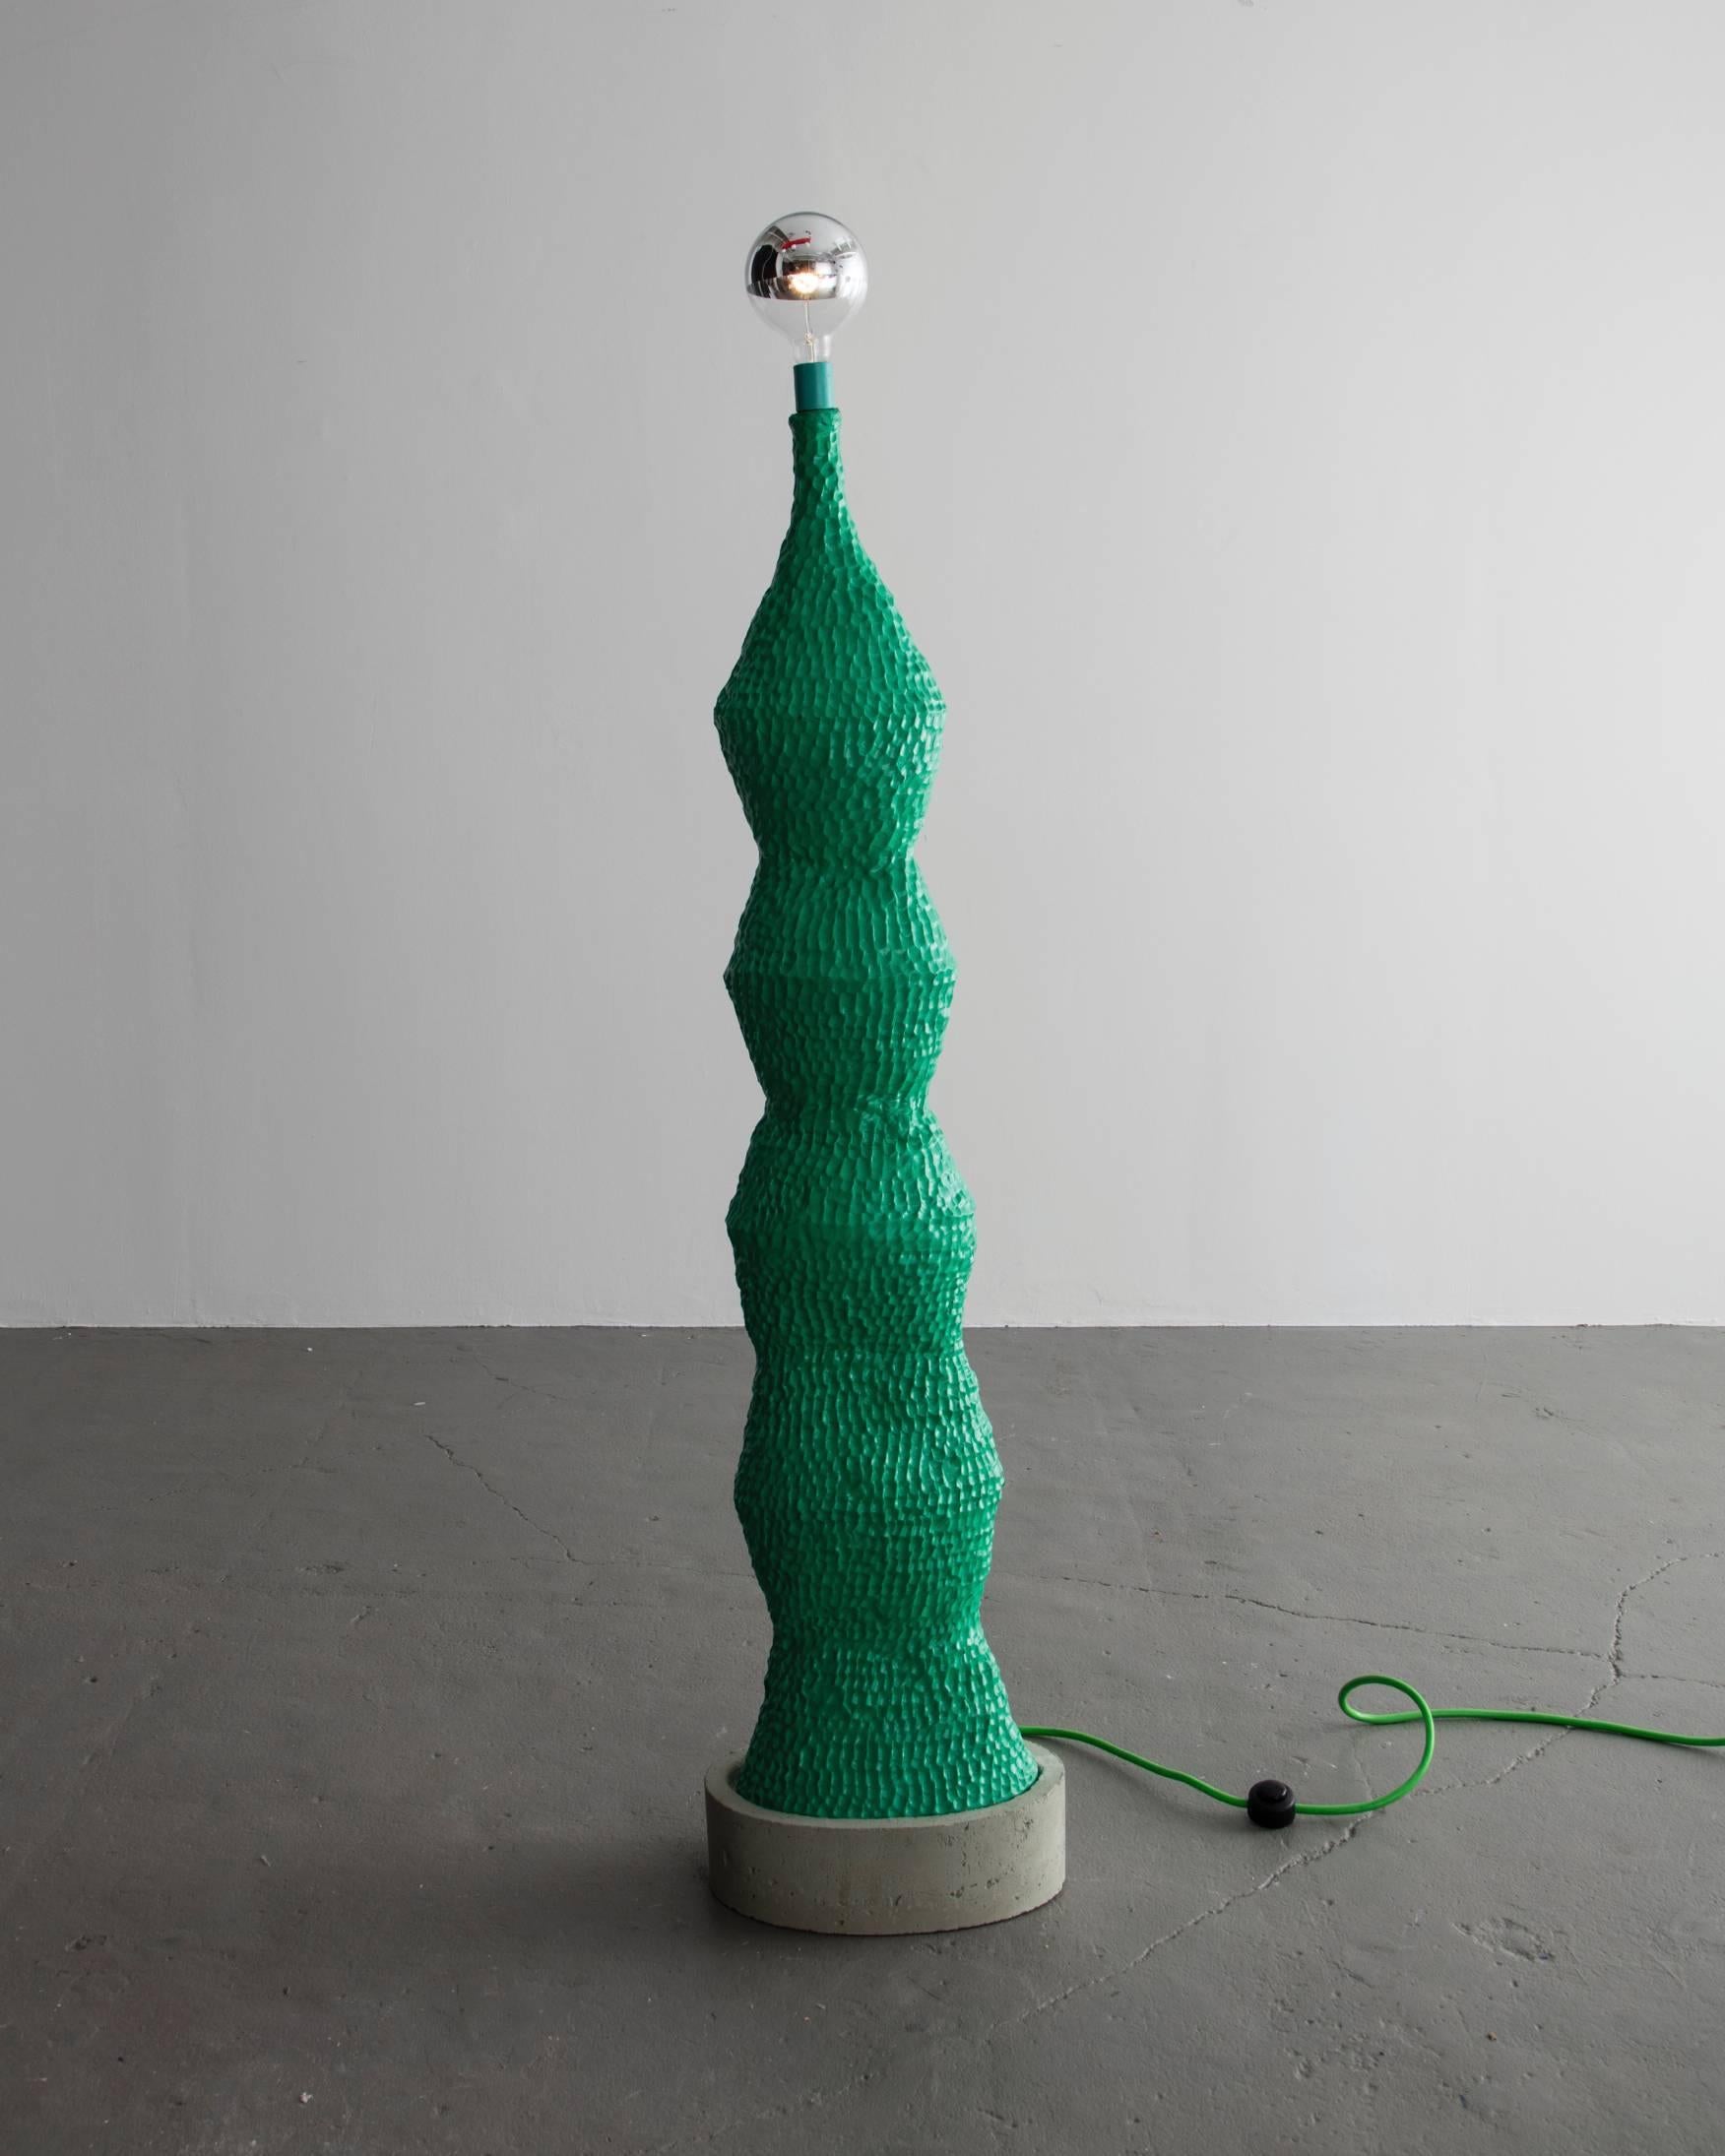 Green standing lamp in ceramic and cement. Designed by Katie Stout with Sean Gerstley, USA, 2014.